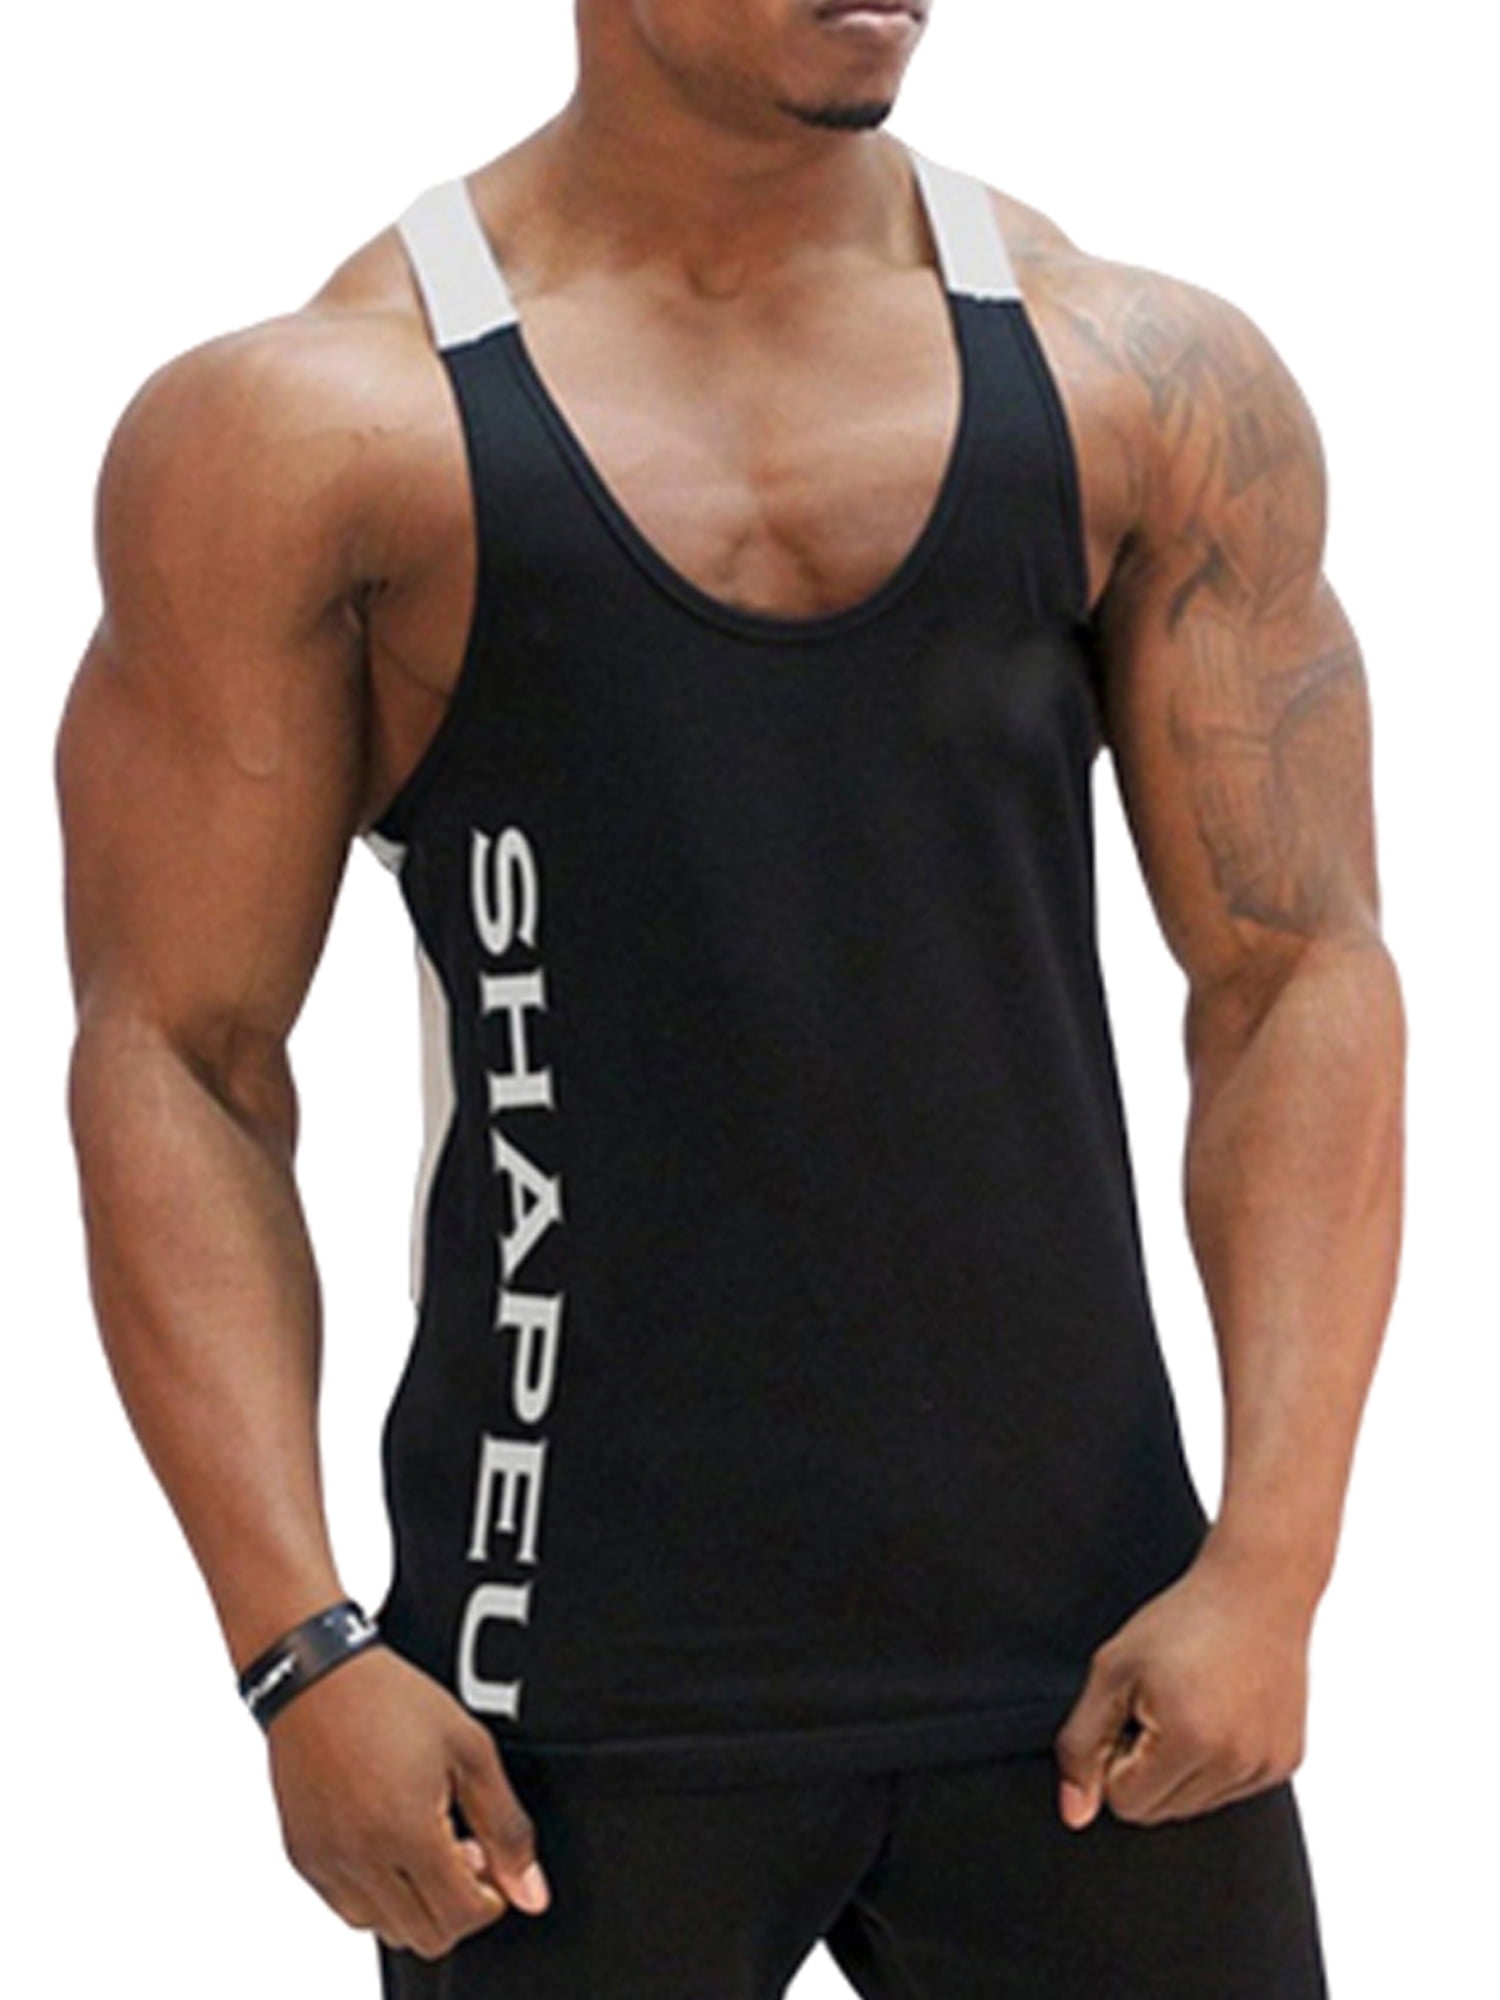 WSEVYPO Men's Athletic Stringer Gym Muscle Workout Racerback Fitness ...